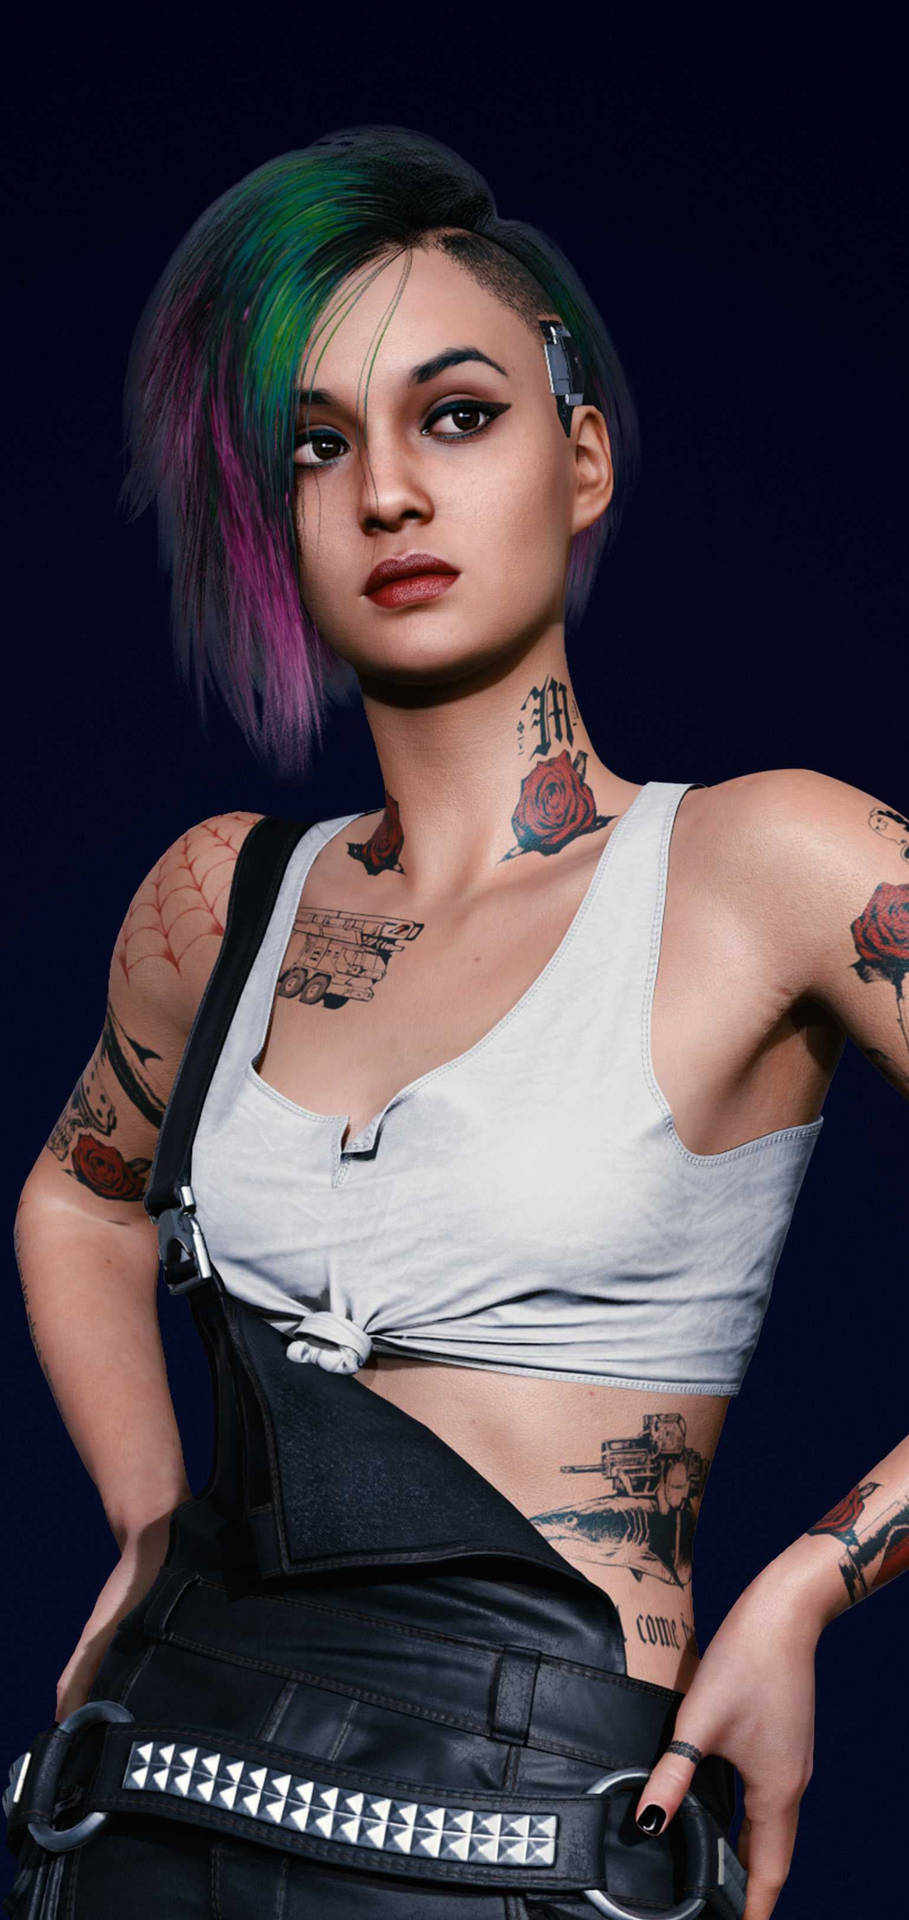 Judy Portrait Photo In Cyberpunk For Android Wallpaper